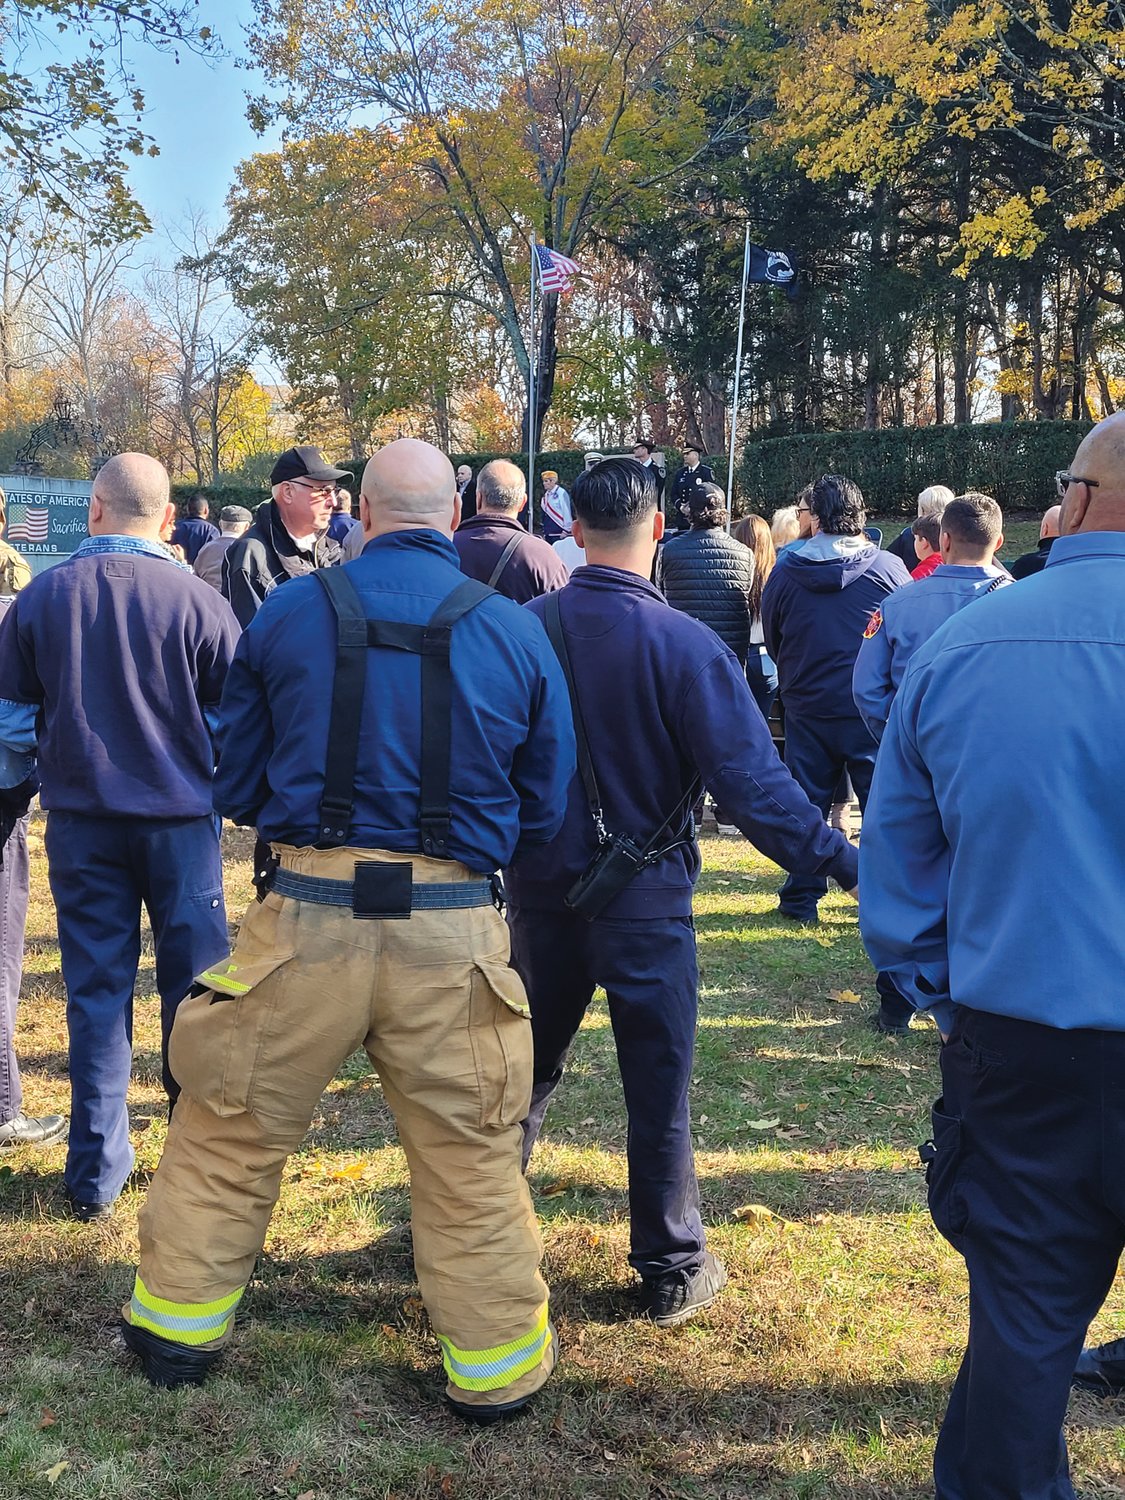 FIREFIGHTERS SERVE: Johnston firefighters showed up for last week's Veterans Day ceremony at Memorial Park.